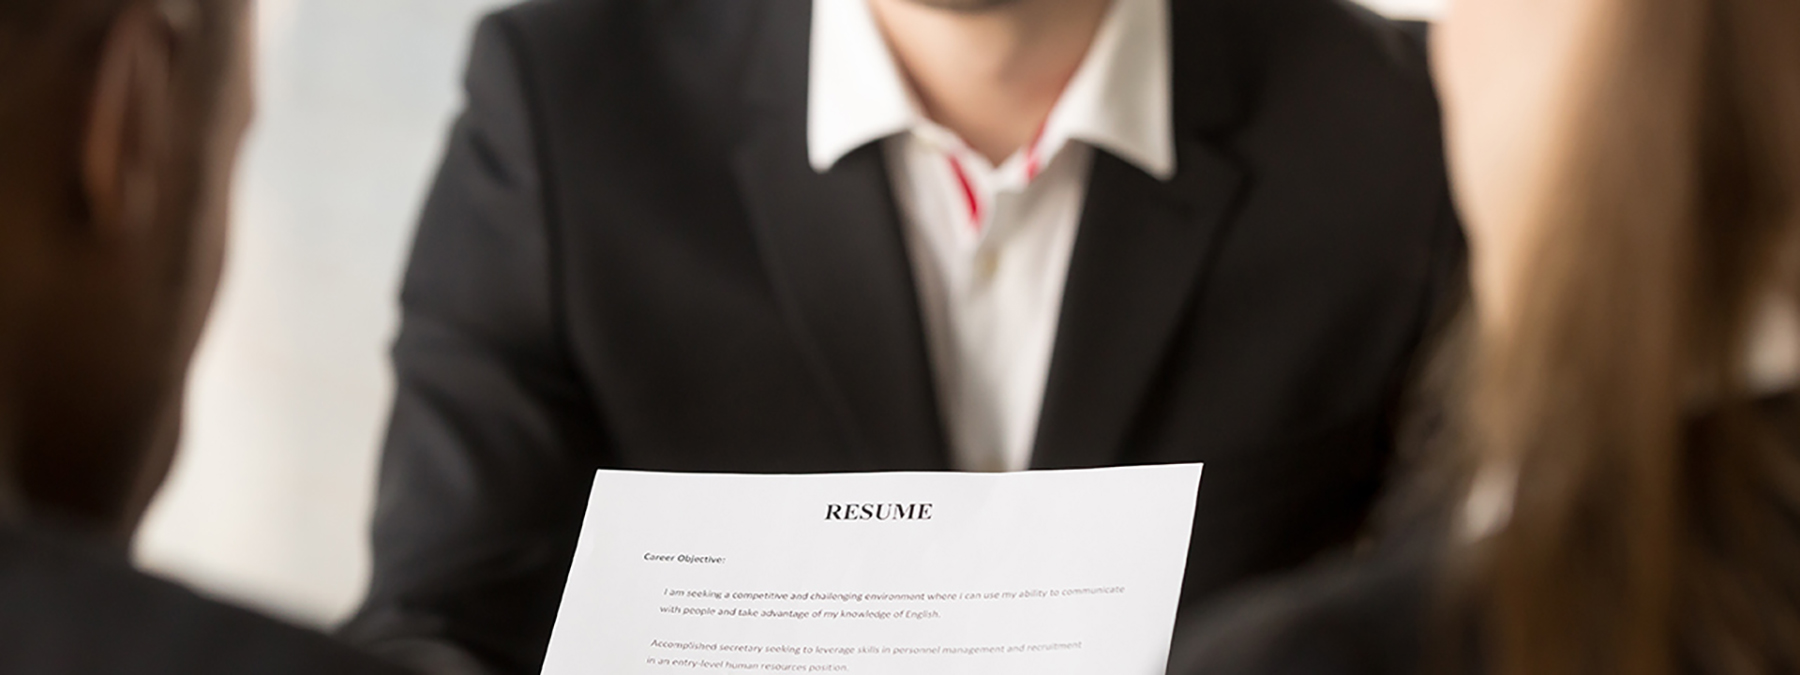 Man holding up a resume and interviewing a woman